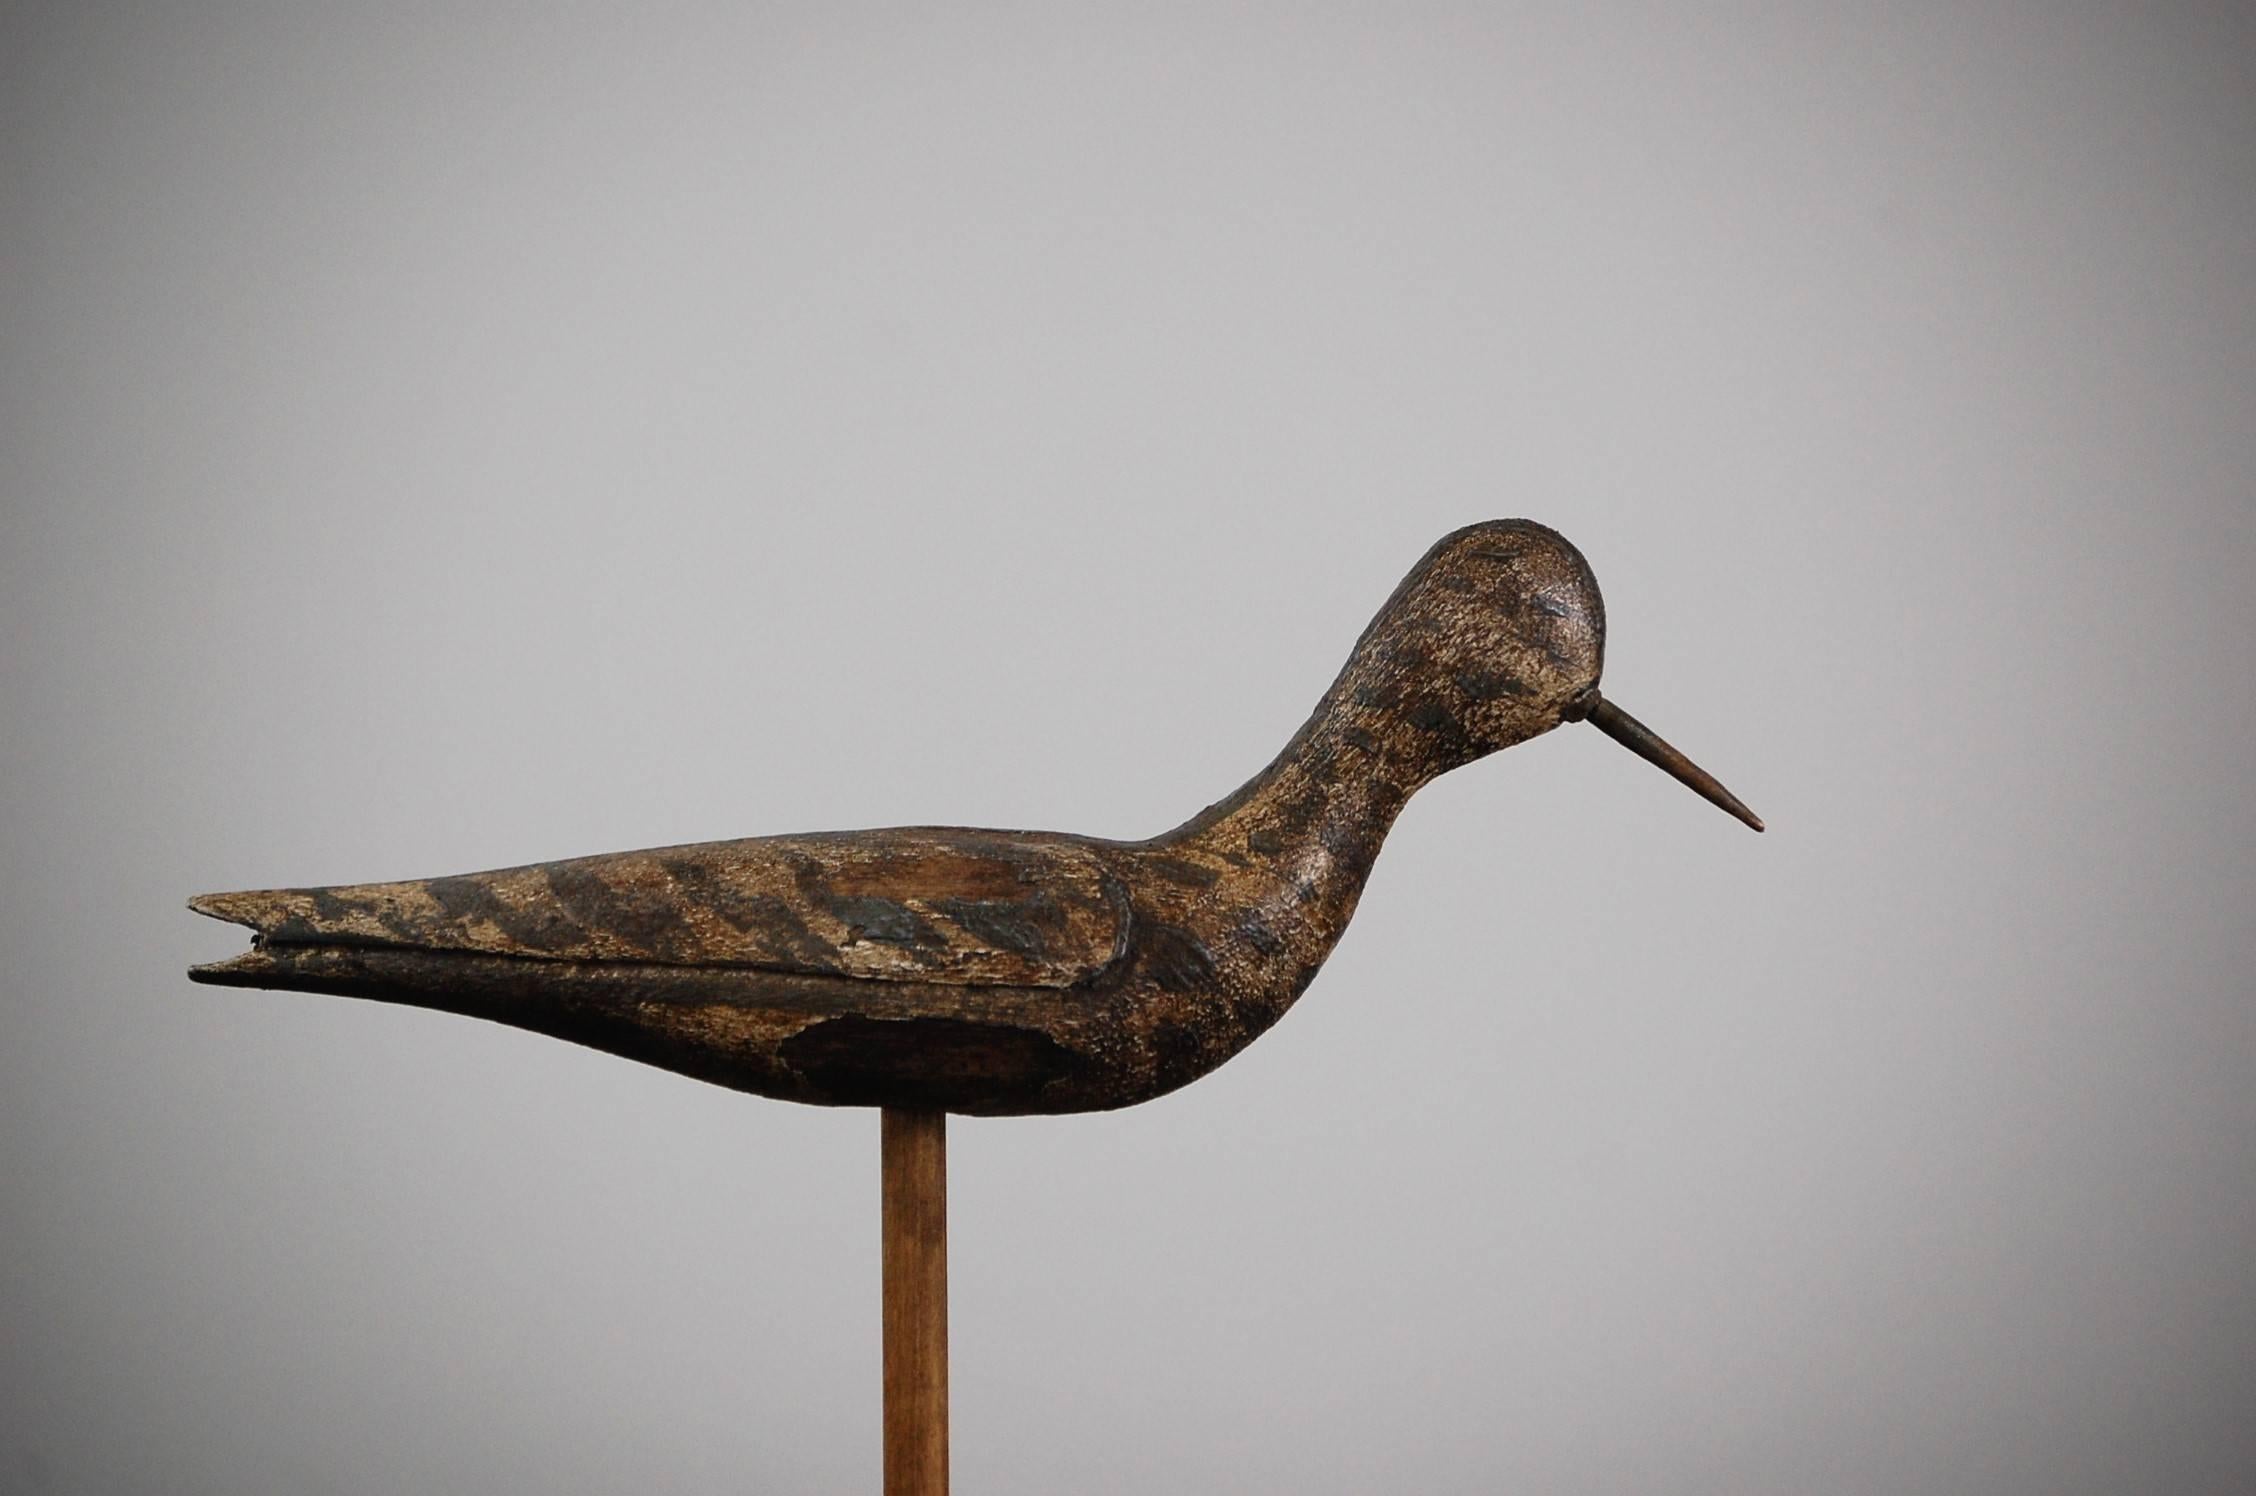 English Pair of Early 20th Century Sandpiper Working Decoys